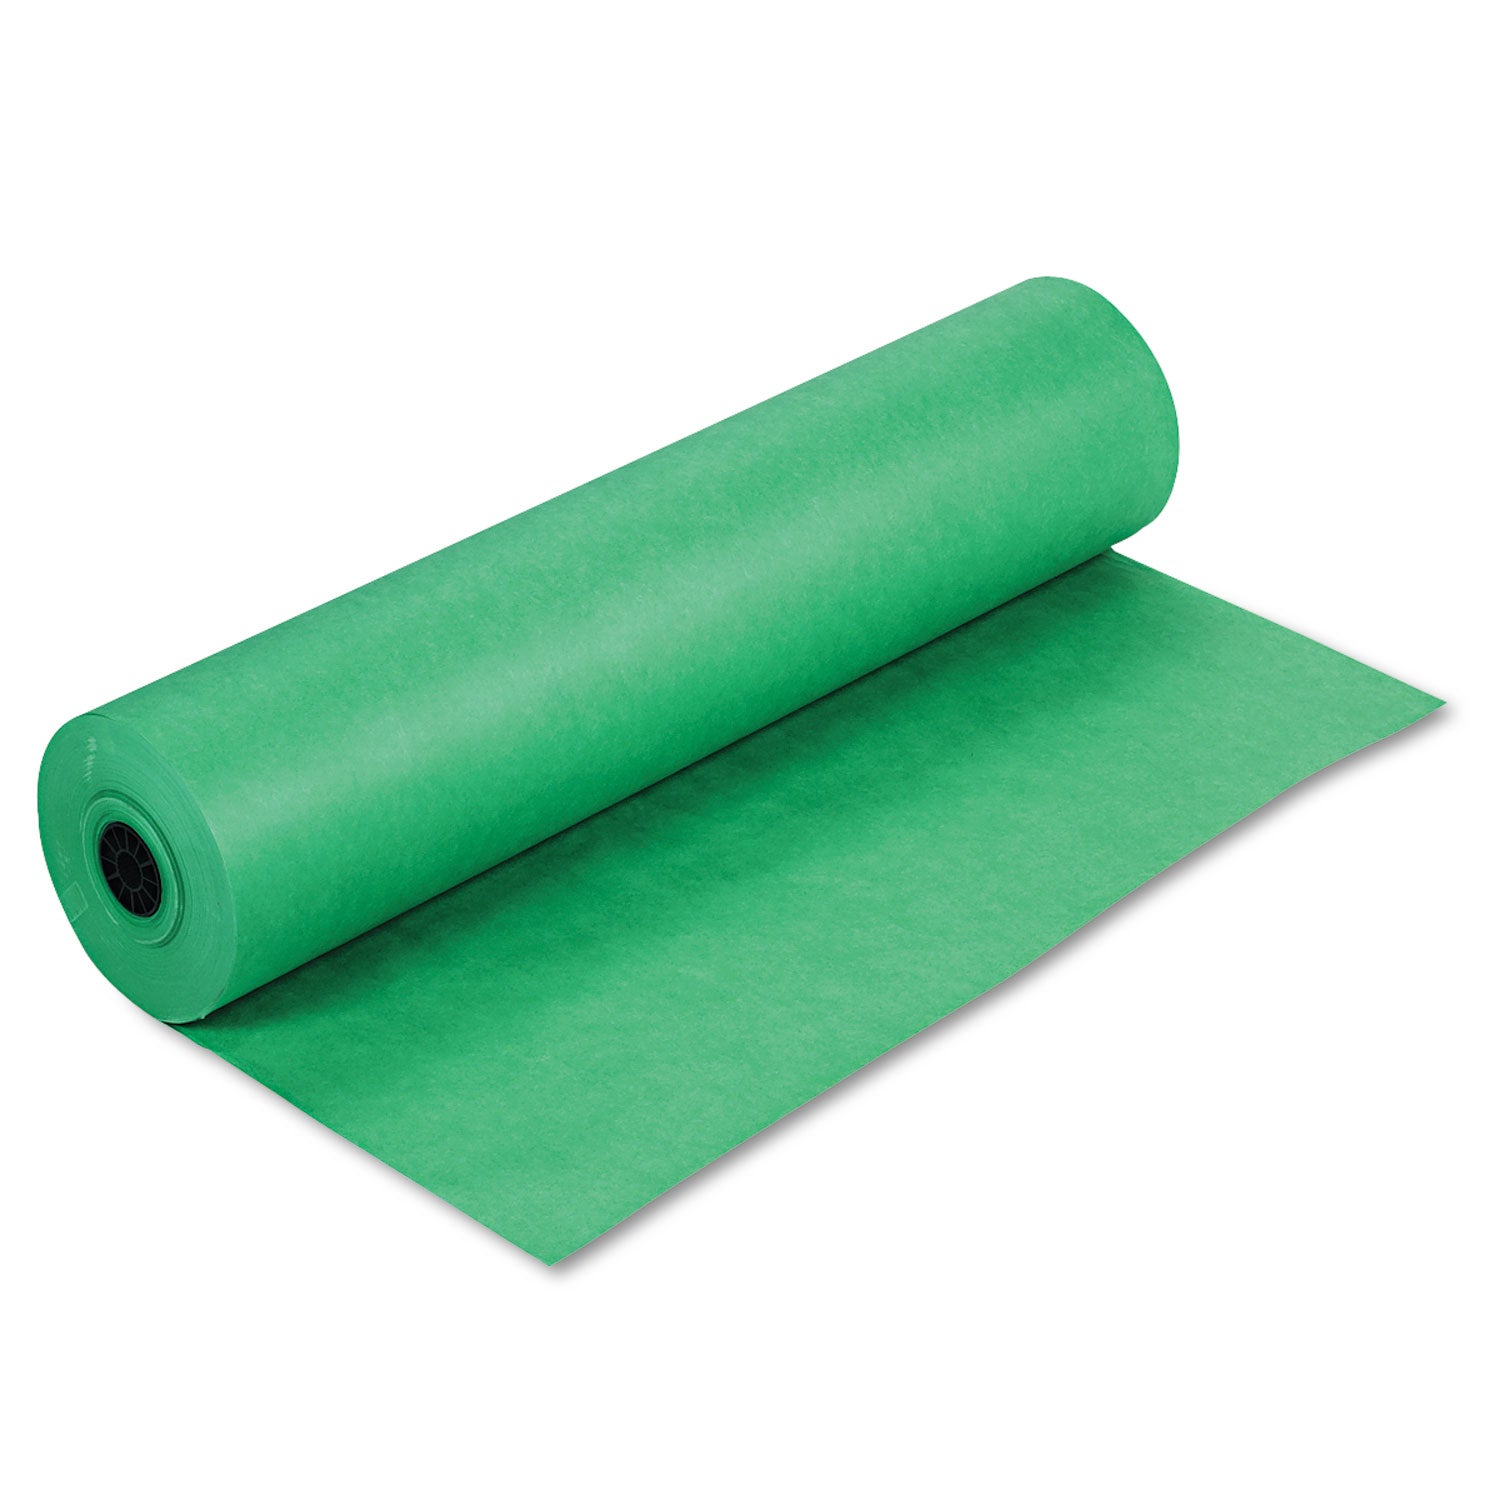 spectra-artkraft-duo-finish-paper-48-lb-text-weight-36-x-1000-ft-bright-green_pac67131 - 1